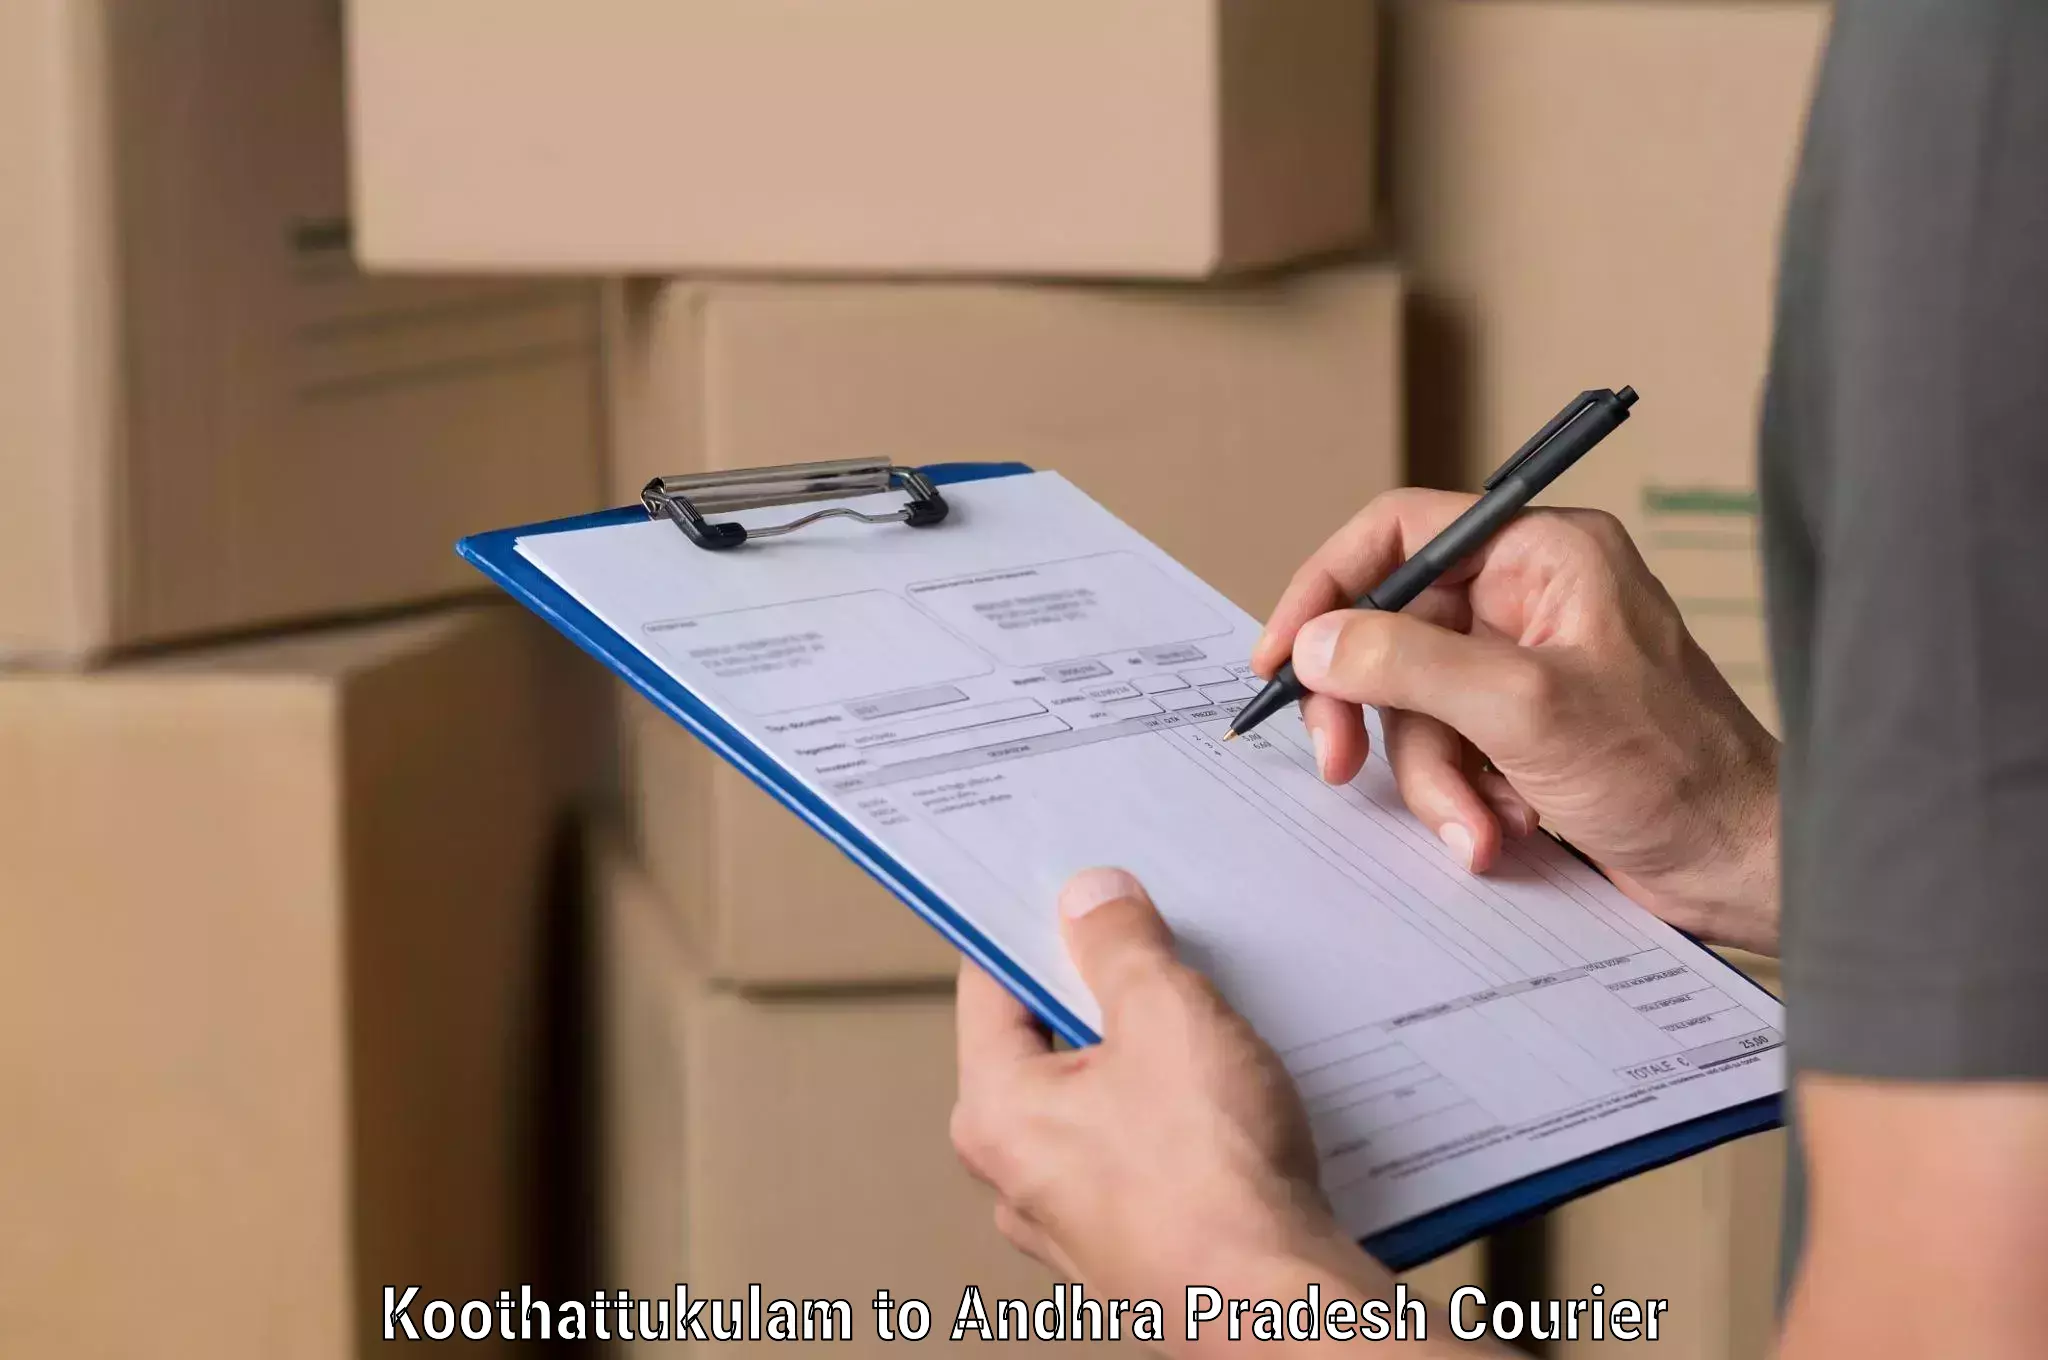 Courier tracking online Koothattukulam to Nellore